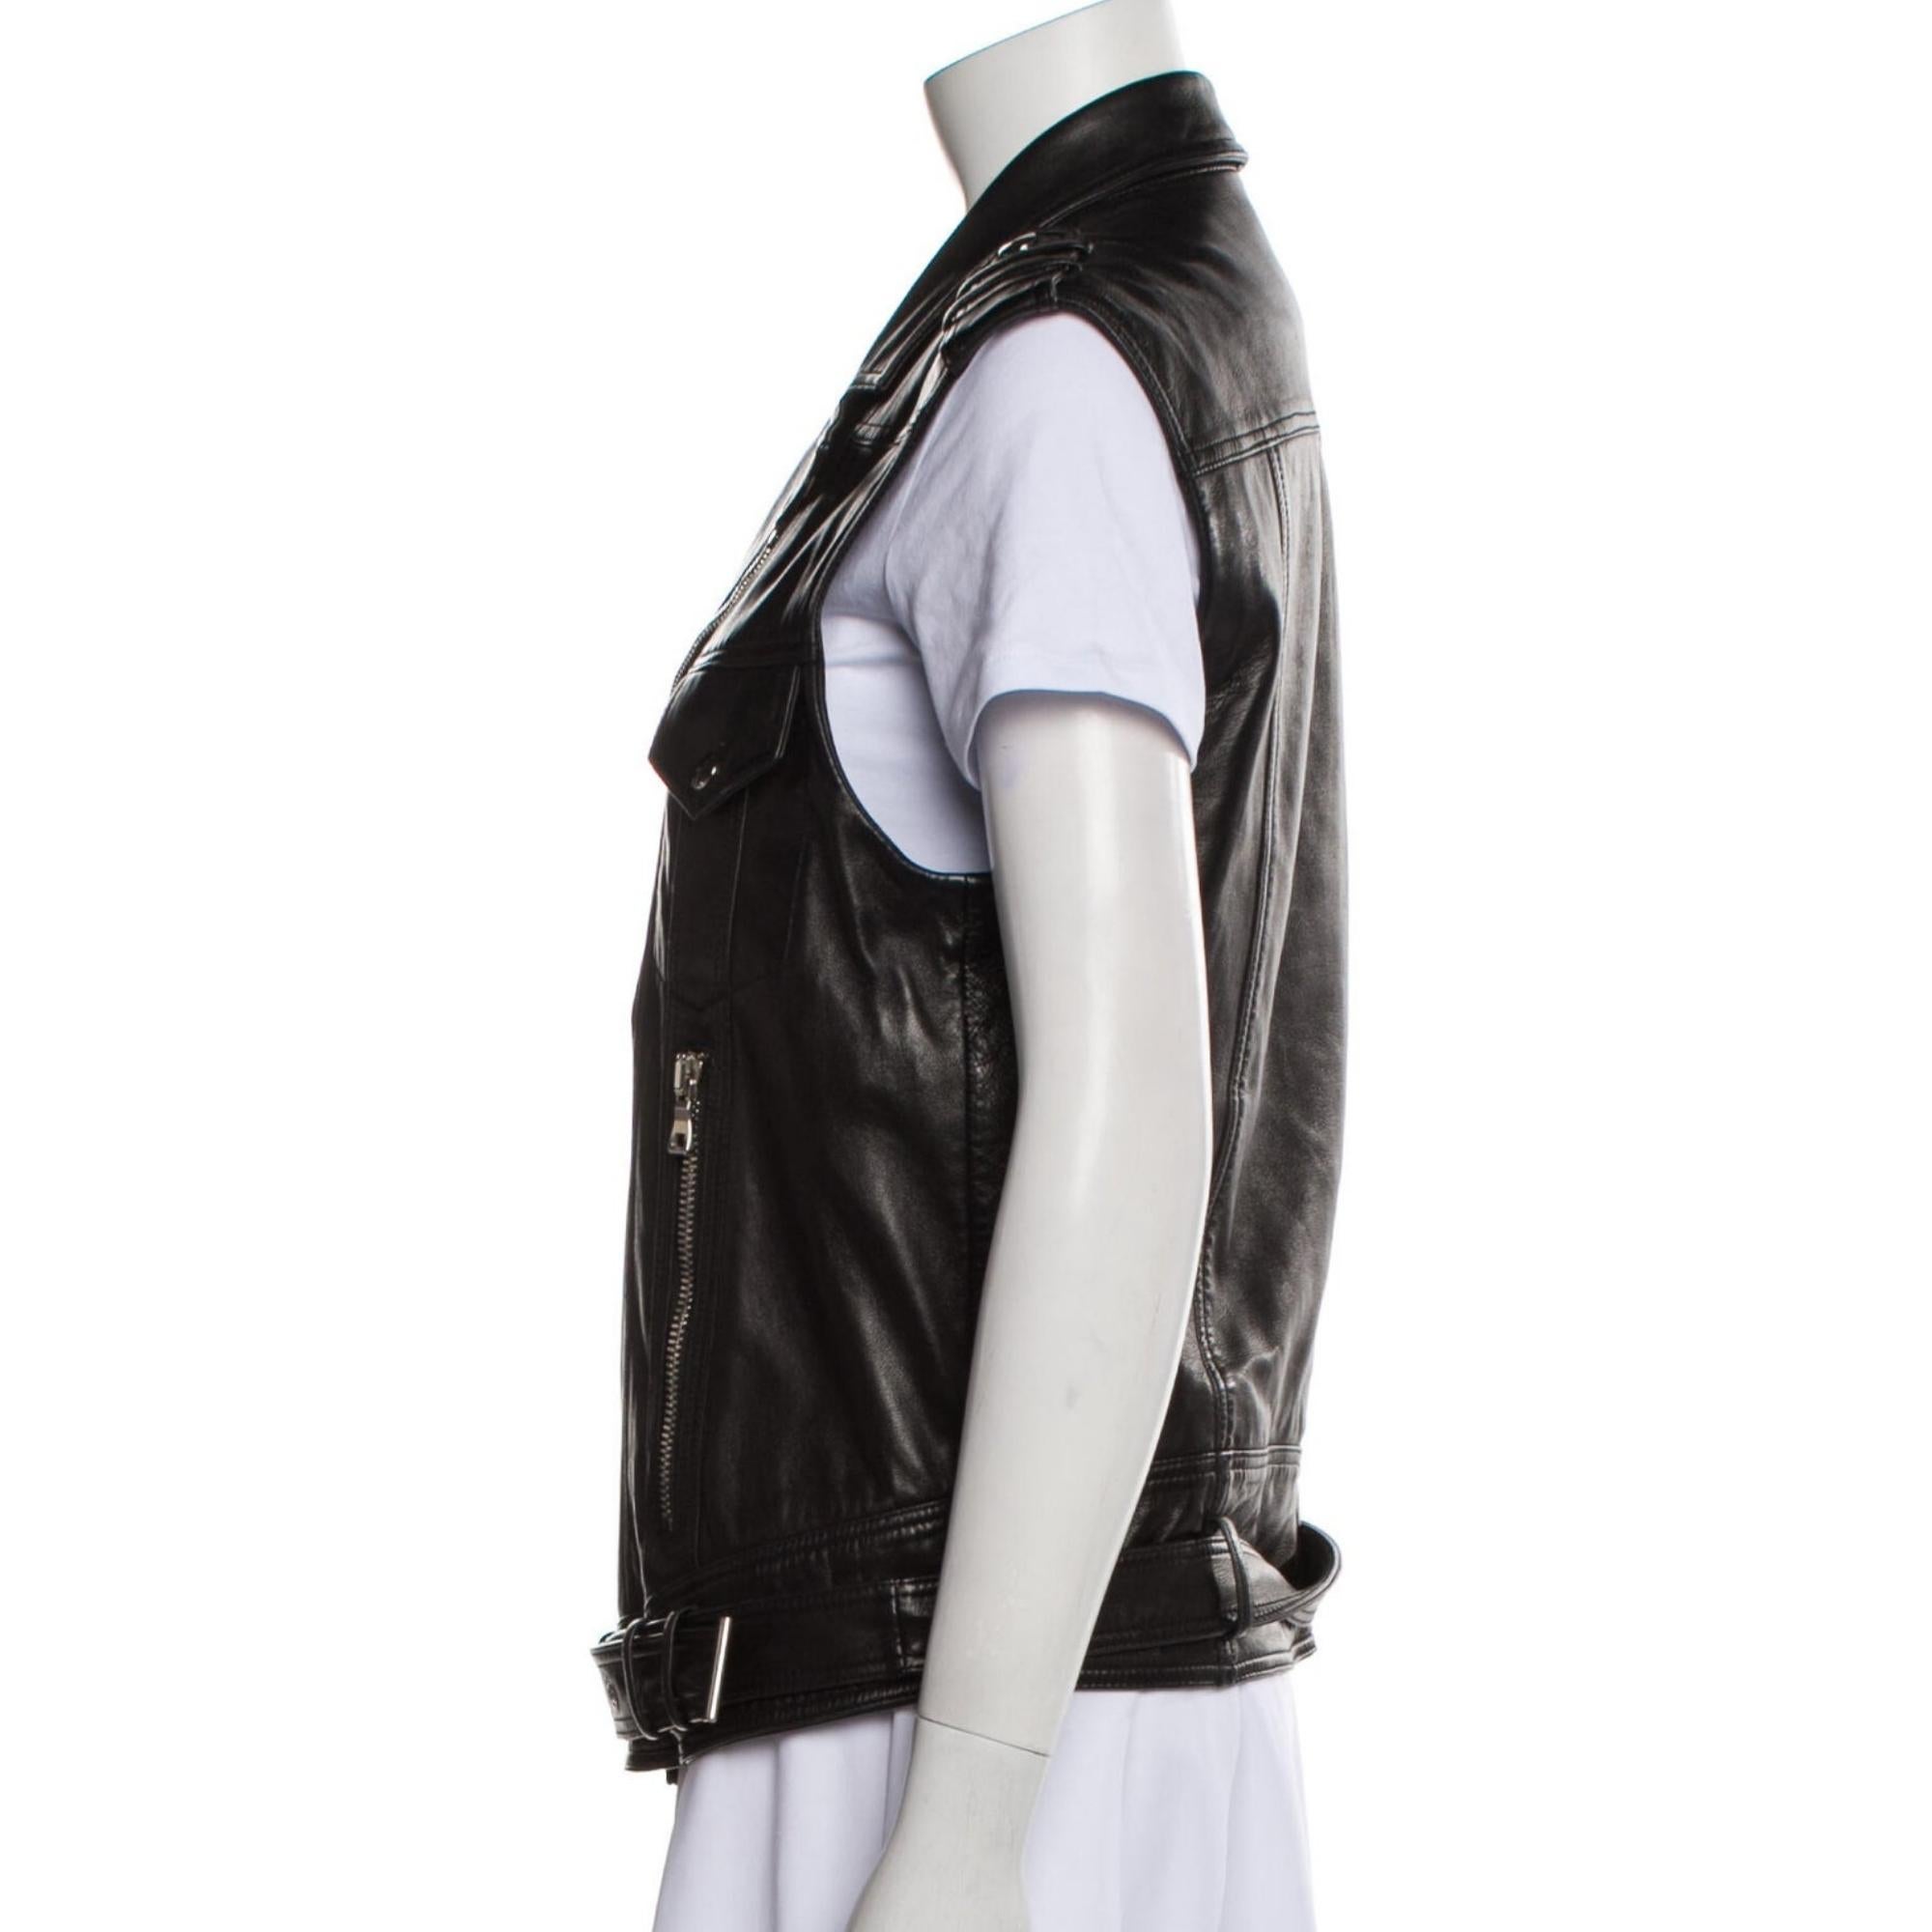 Balmain sleeveless biker-inspired jacket vest. Pointed collar. Made in Turkey with 100% lambskin. Two front buttoned pockets, two zipped pockets also at the front. Zipped closure, inside pockets as well. 

COLOR: Black 
MATERIAL: Lambskin leather